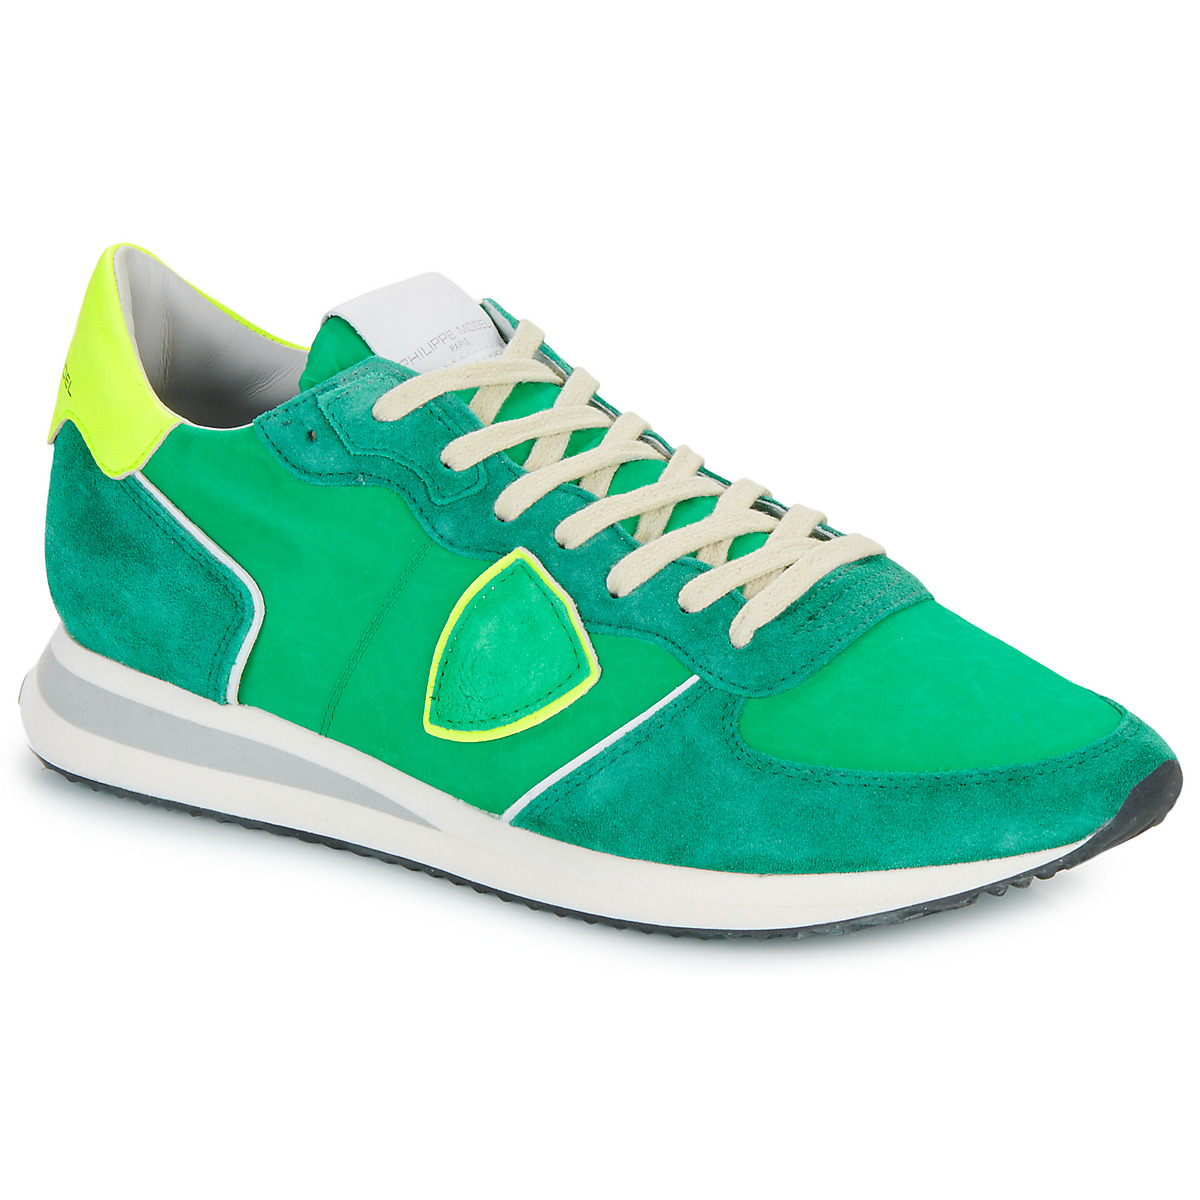 Shoes Men Low top trainers Philippe Model TRPX LOW MAN Green / Yellow